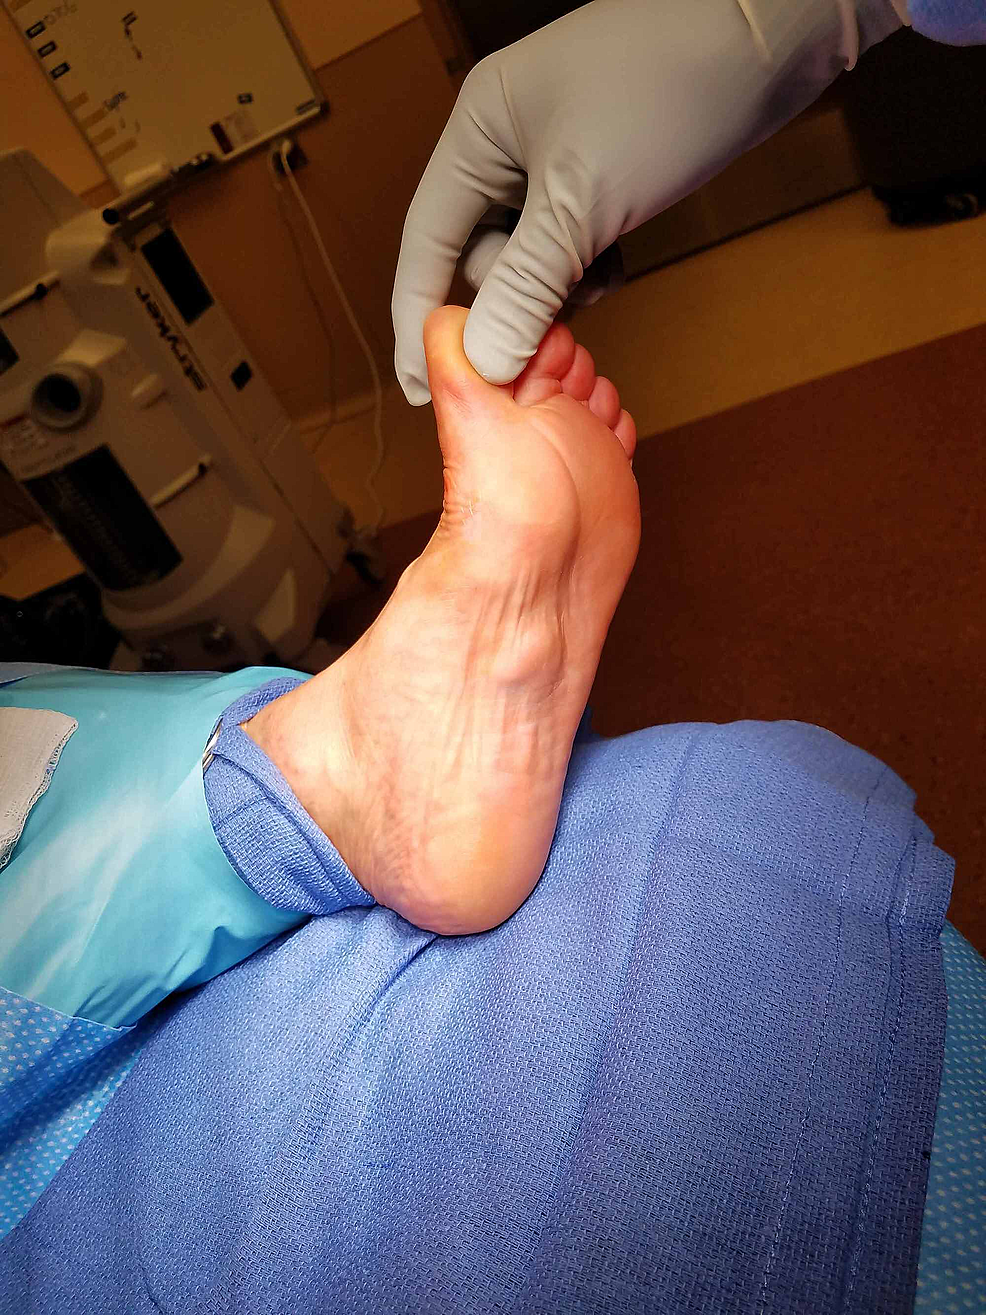 Closed-Incision Negative Pressure Therapy in Place of Surgical Drain Placement in Plantar Fibroma Excision Surgery: A Case Series